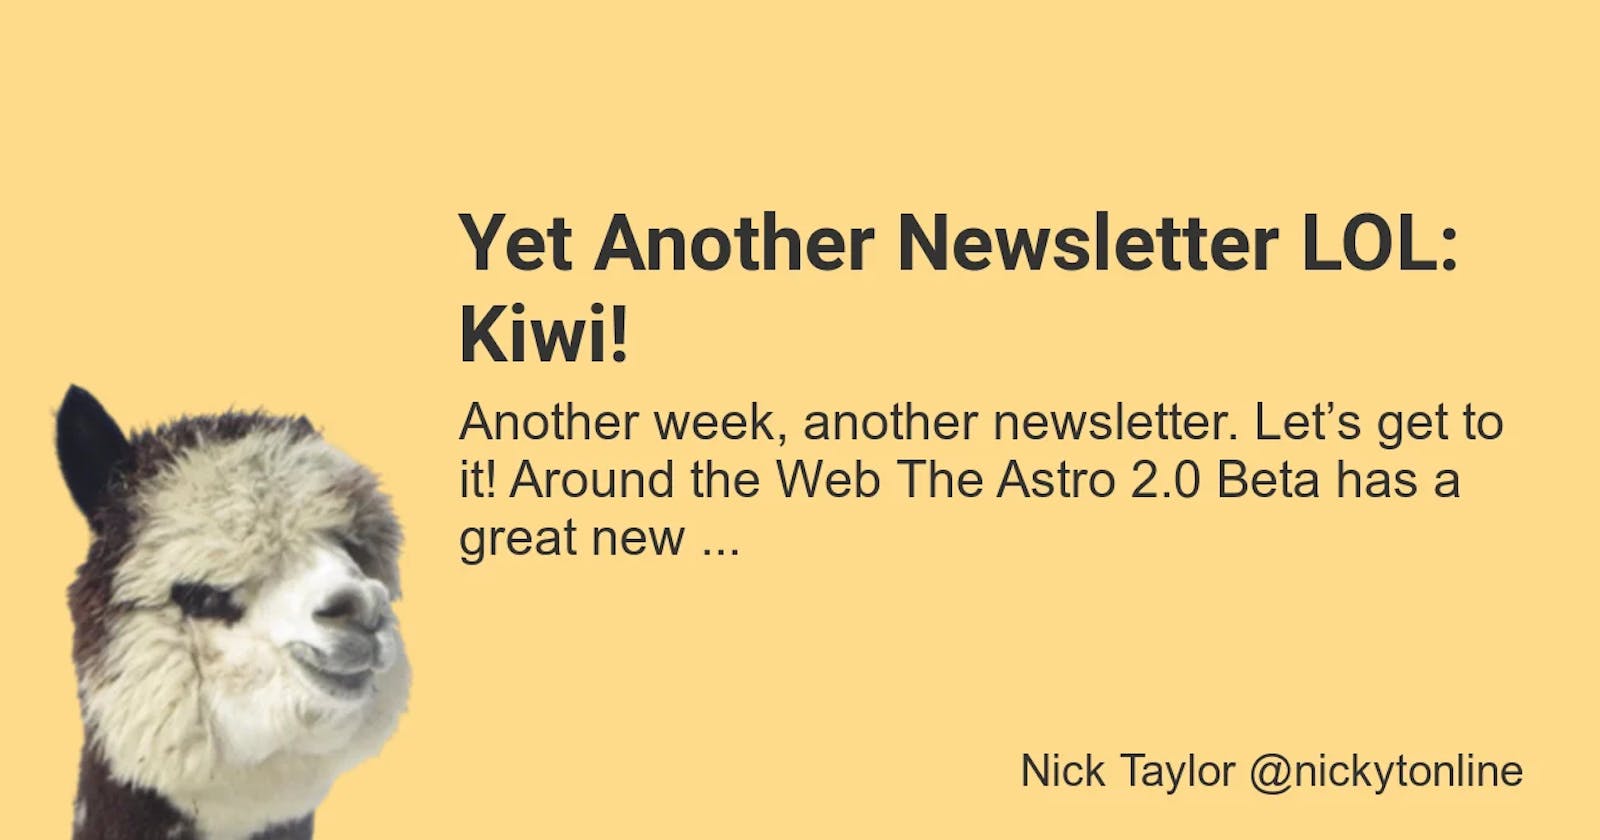 Yet Another Newsletter LOL: Kiwi!